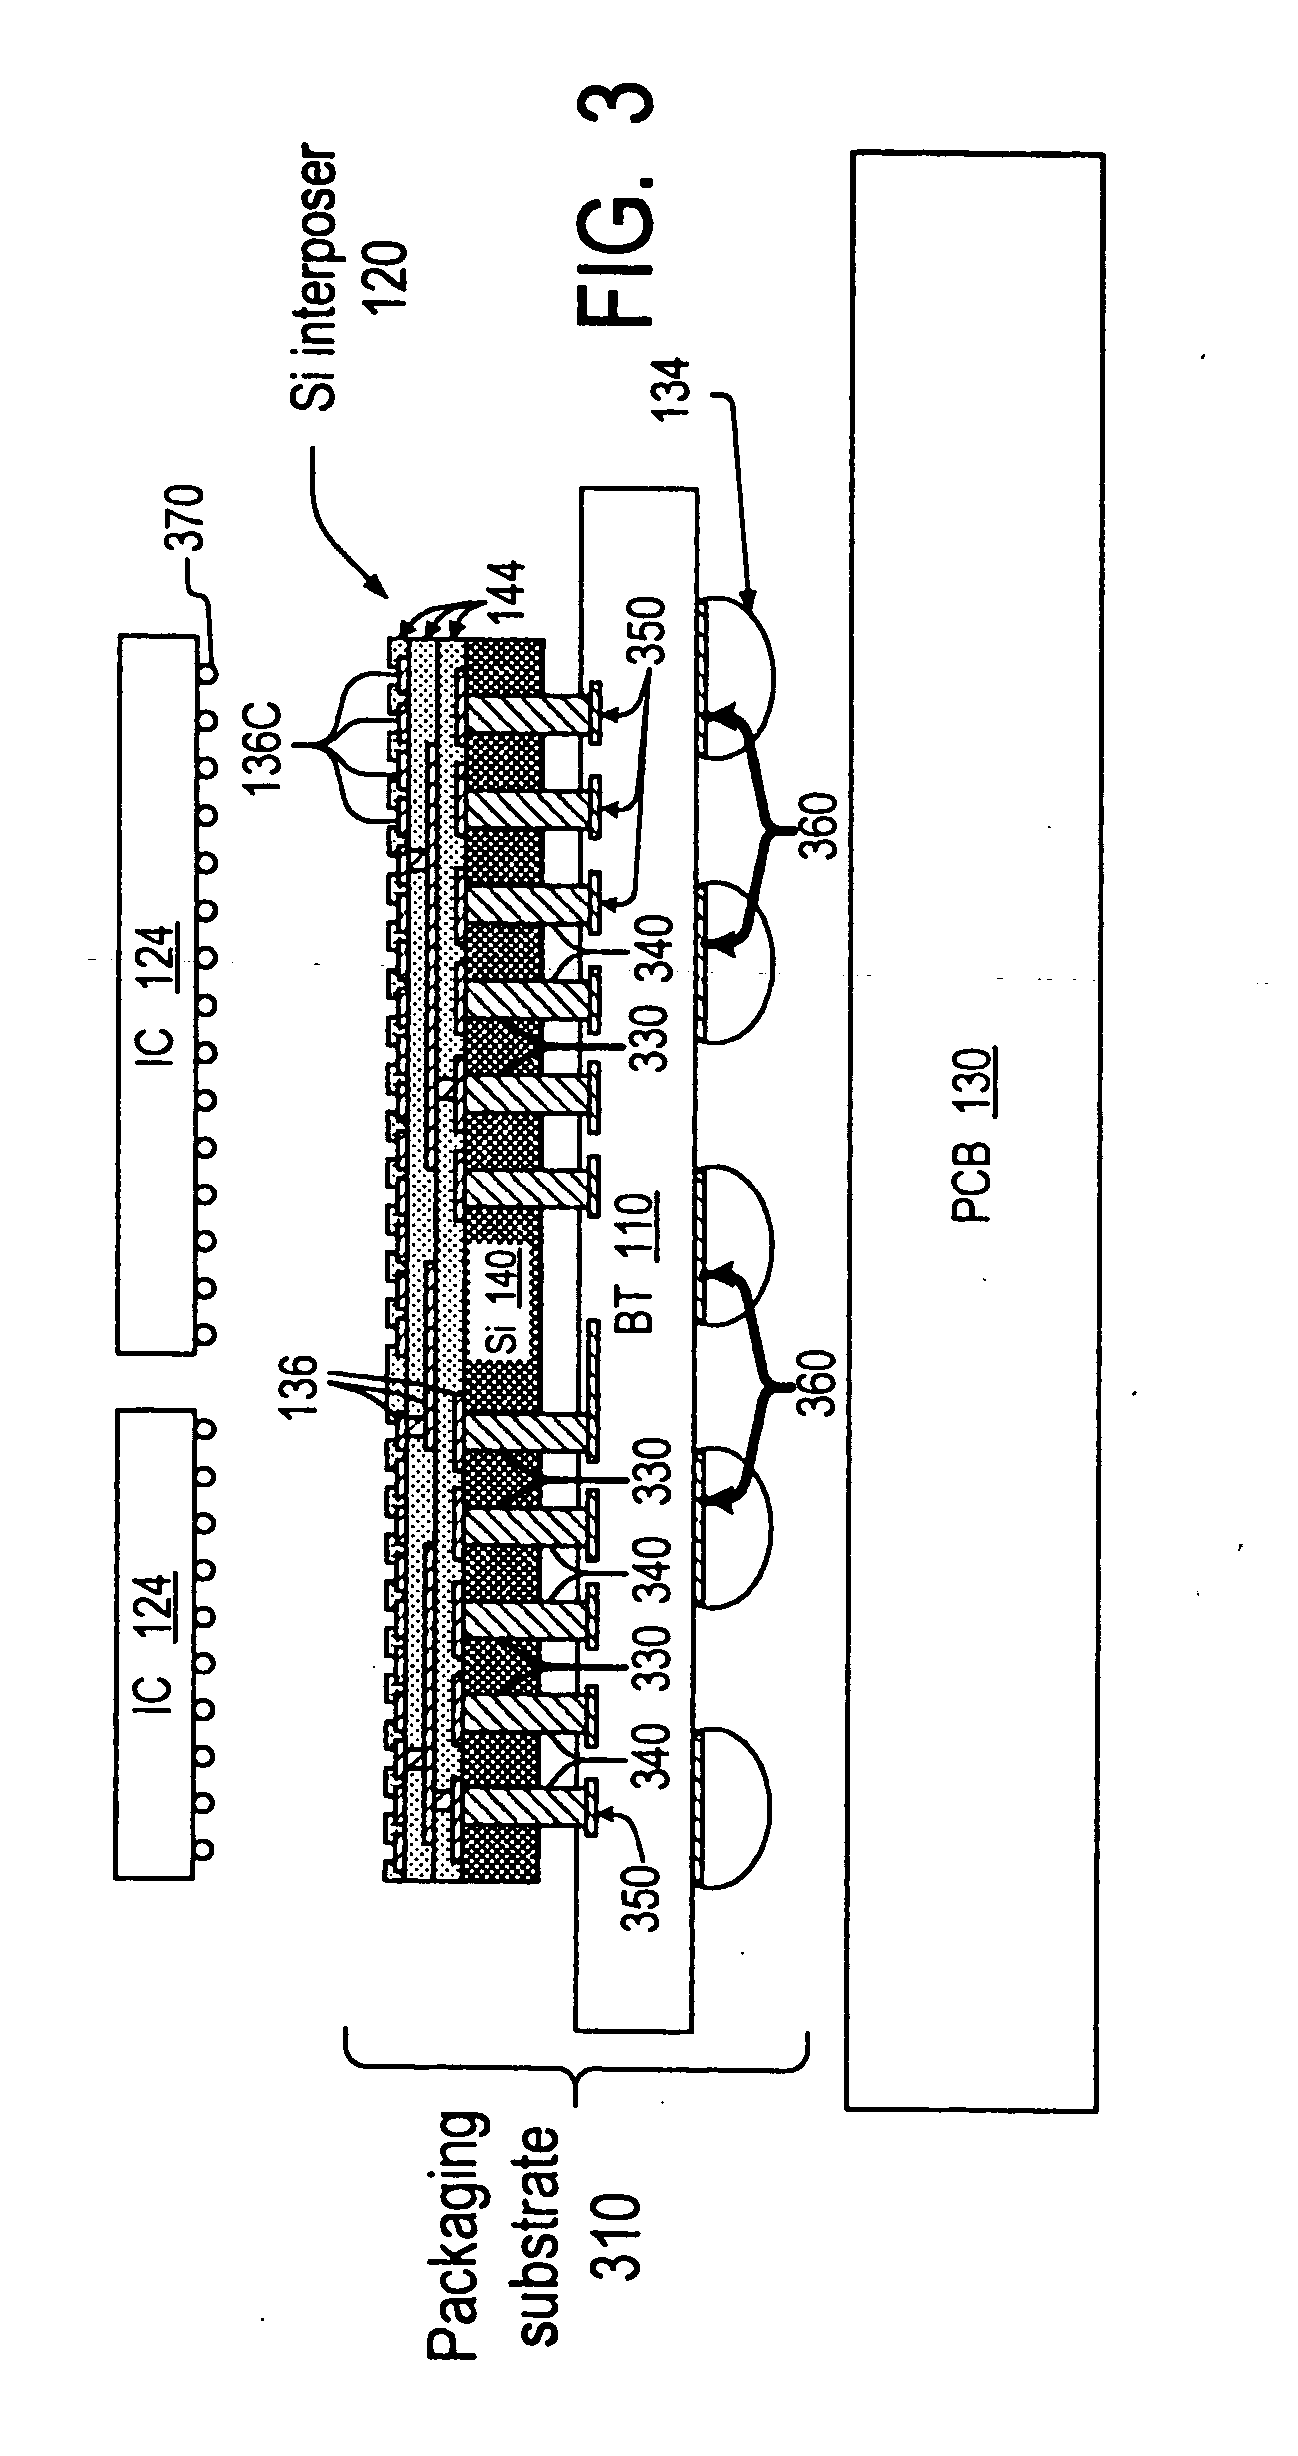 Packaging substrates for integrated circuits and soldering methods